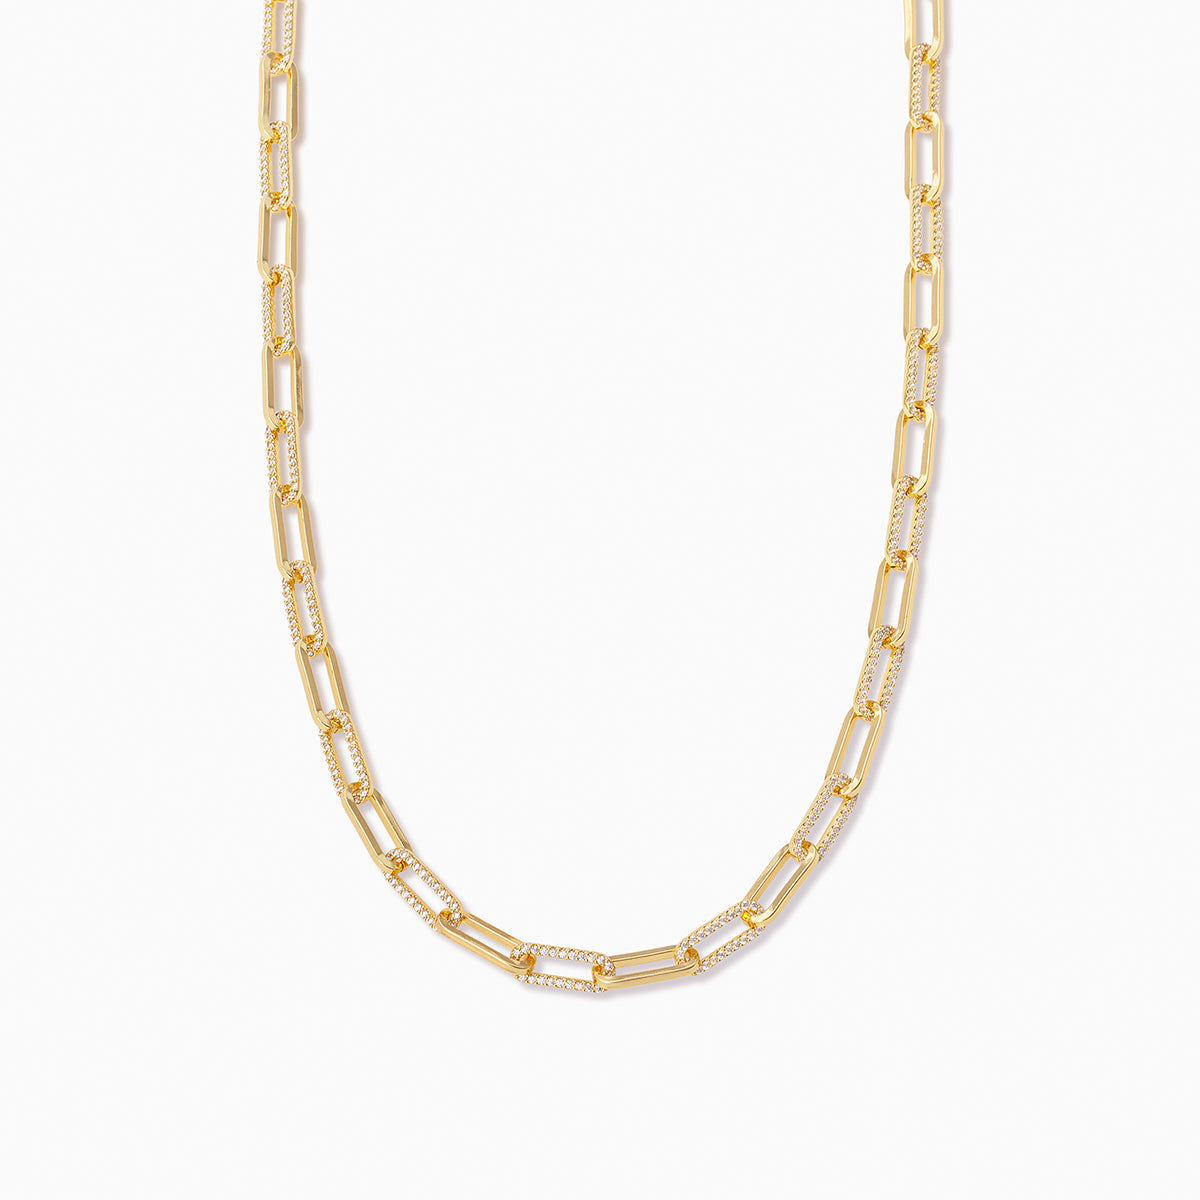 Flashing Lights Chain Necklace | Gold | Product Image | Uncommon James